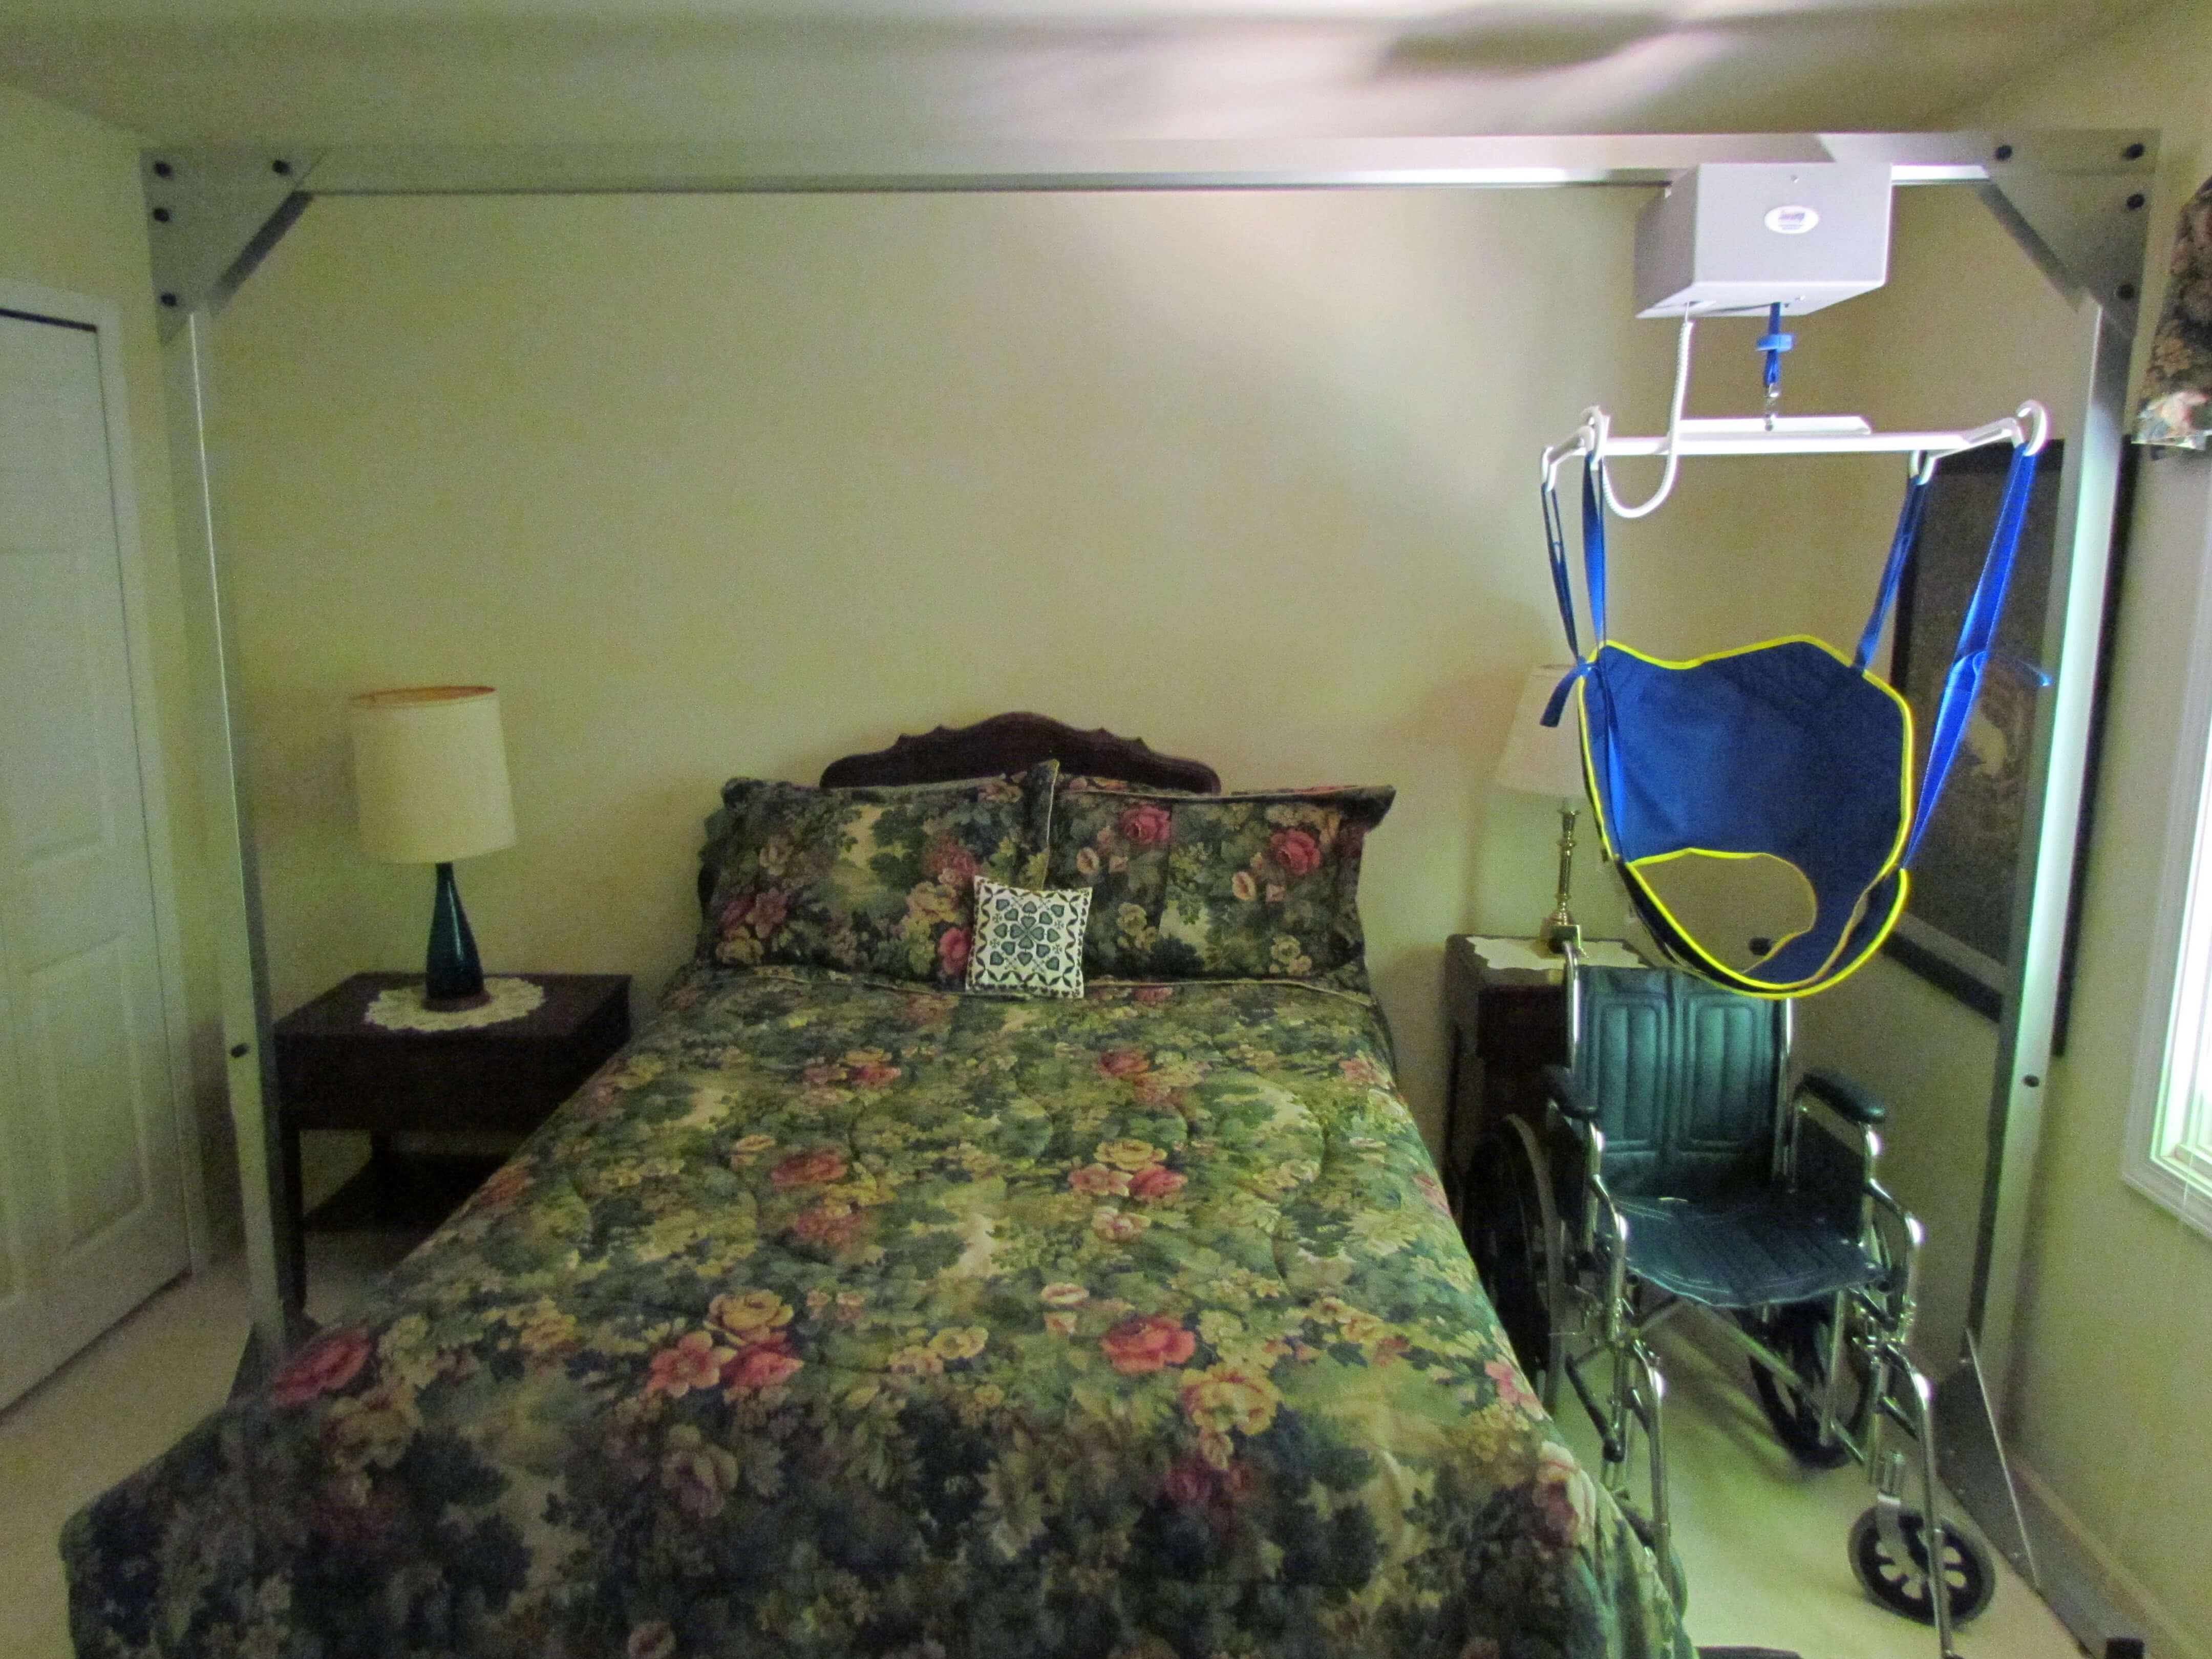 Amramp Overhead Patient Lift helps caregivers move patients from wheelchairs to their beds.